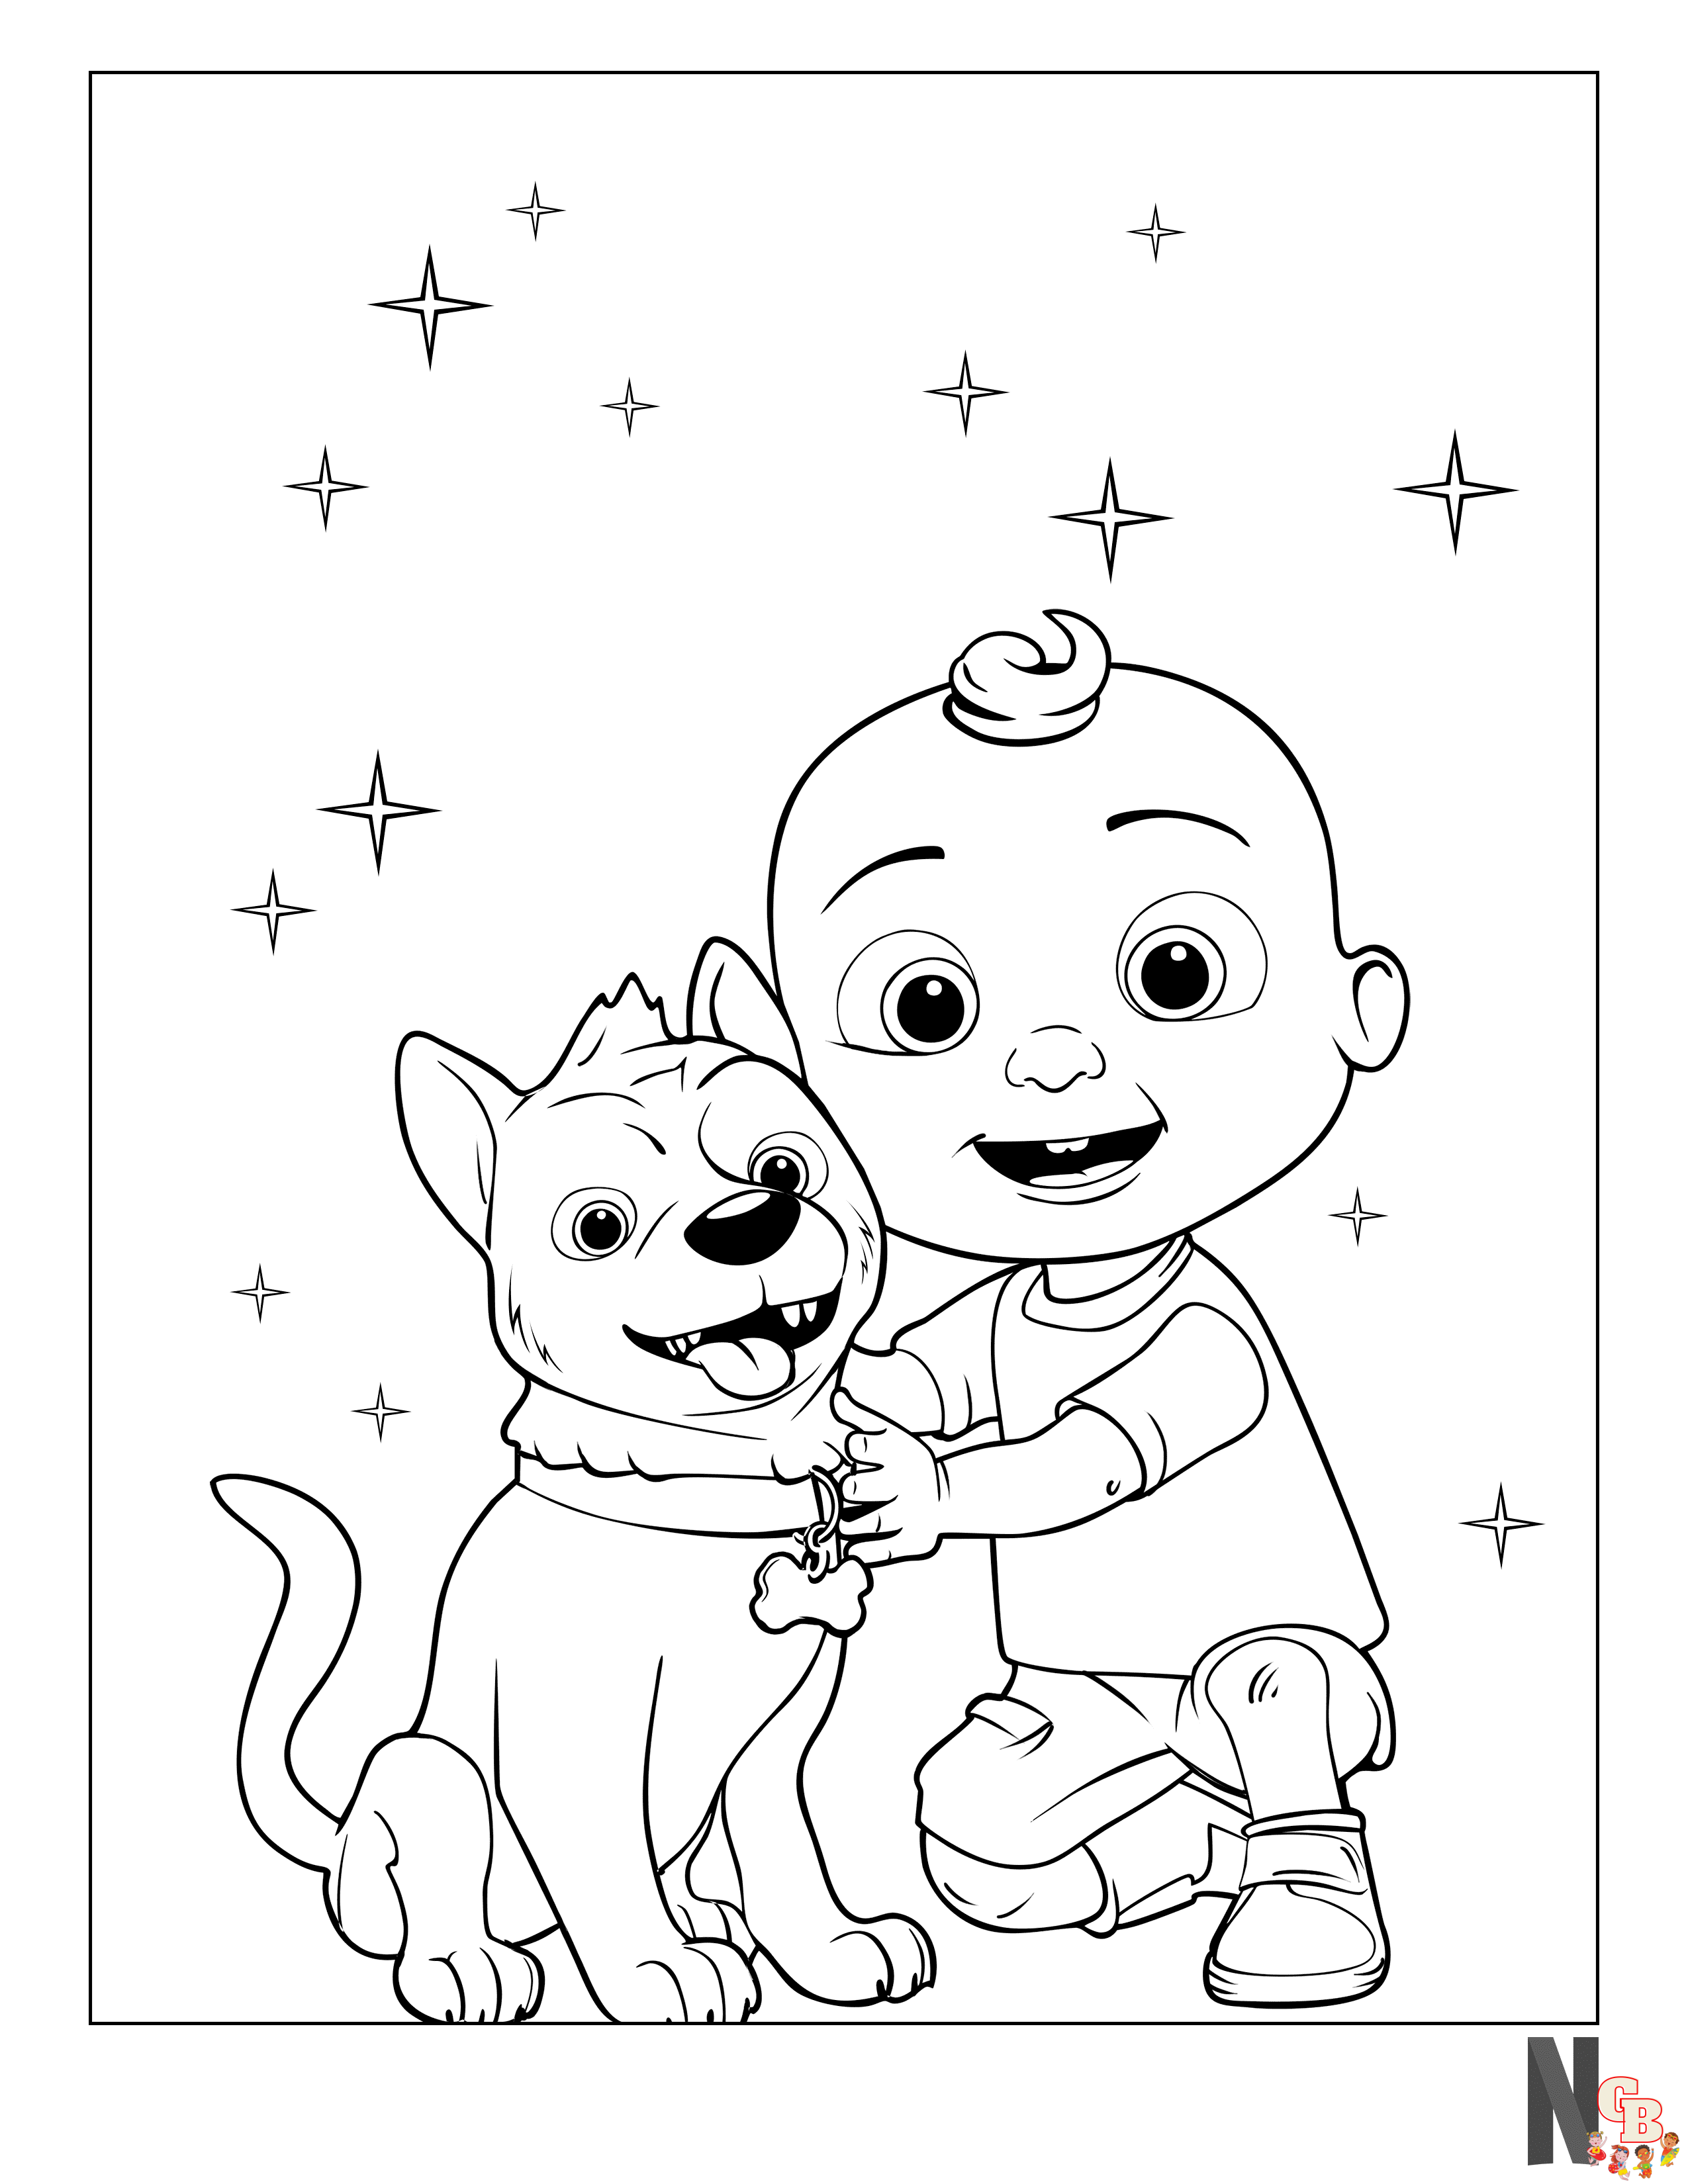 Cocomelon Coloring Pages Δωρεάν εκτυπώσιμες εύκολες για παιδιά